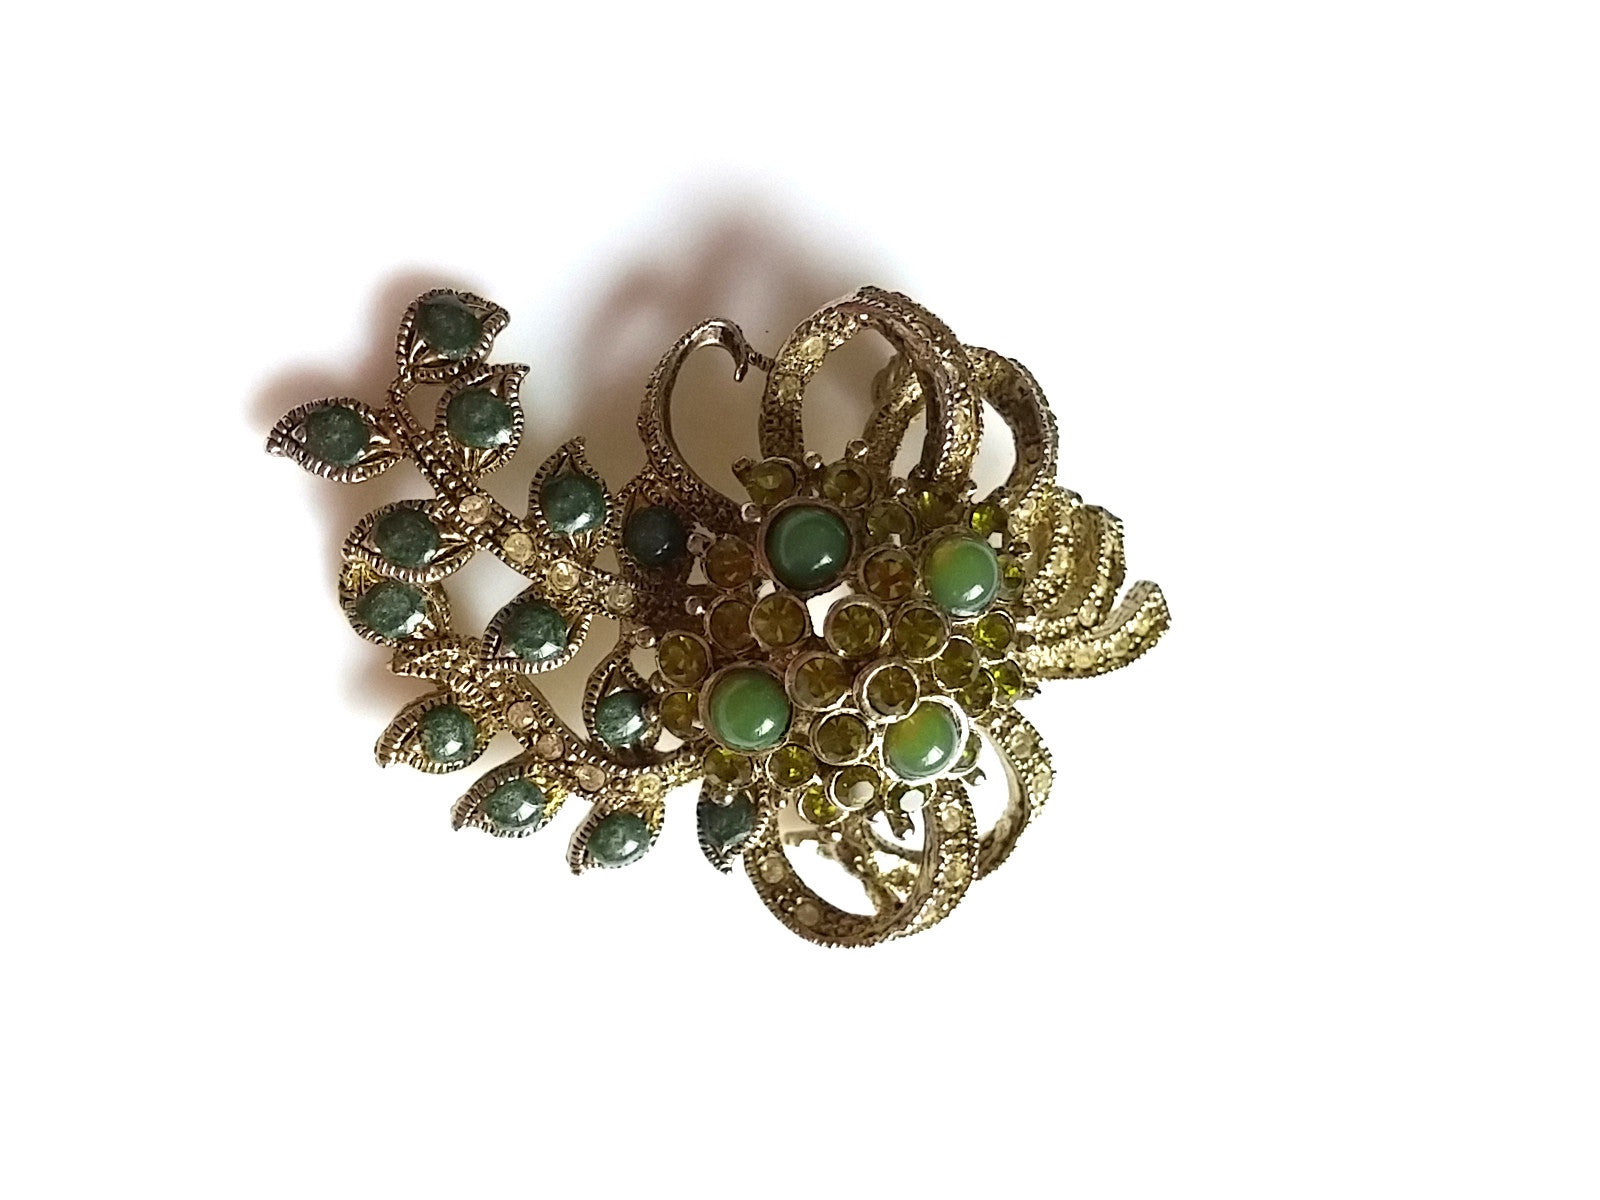 Vintage Bouquet Brooch Gold Tone w/ Green and Peridot Colored Stones - Dirty 30 Vintage | Vintage Clothing, Vintage Jewelry, Vintage Accessories